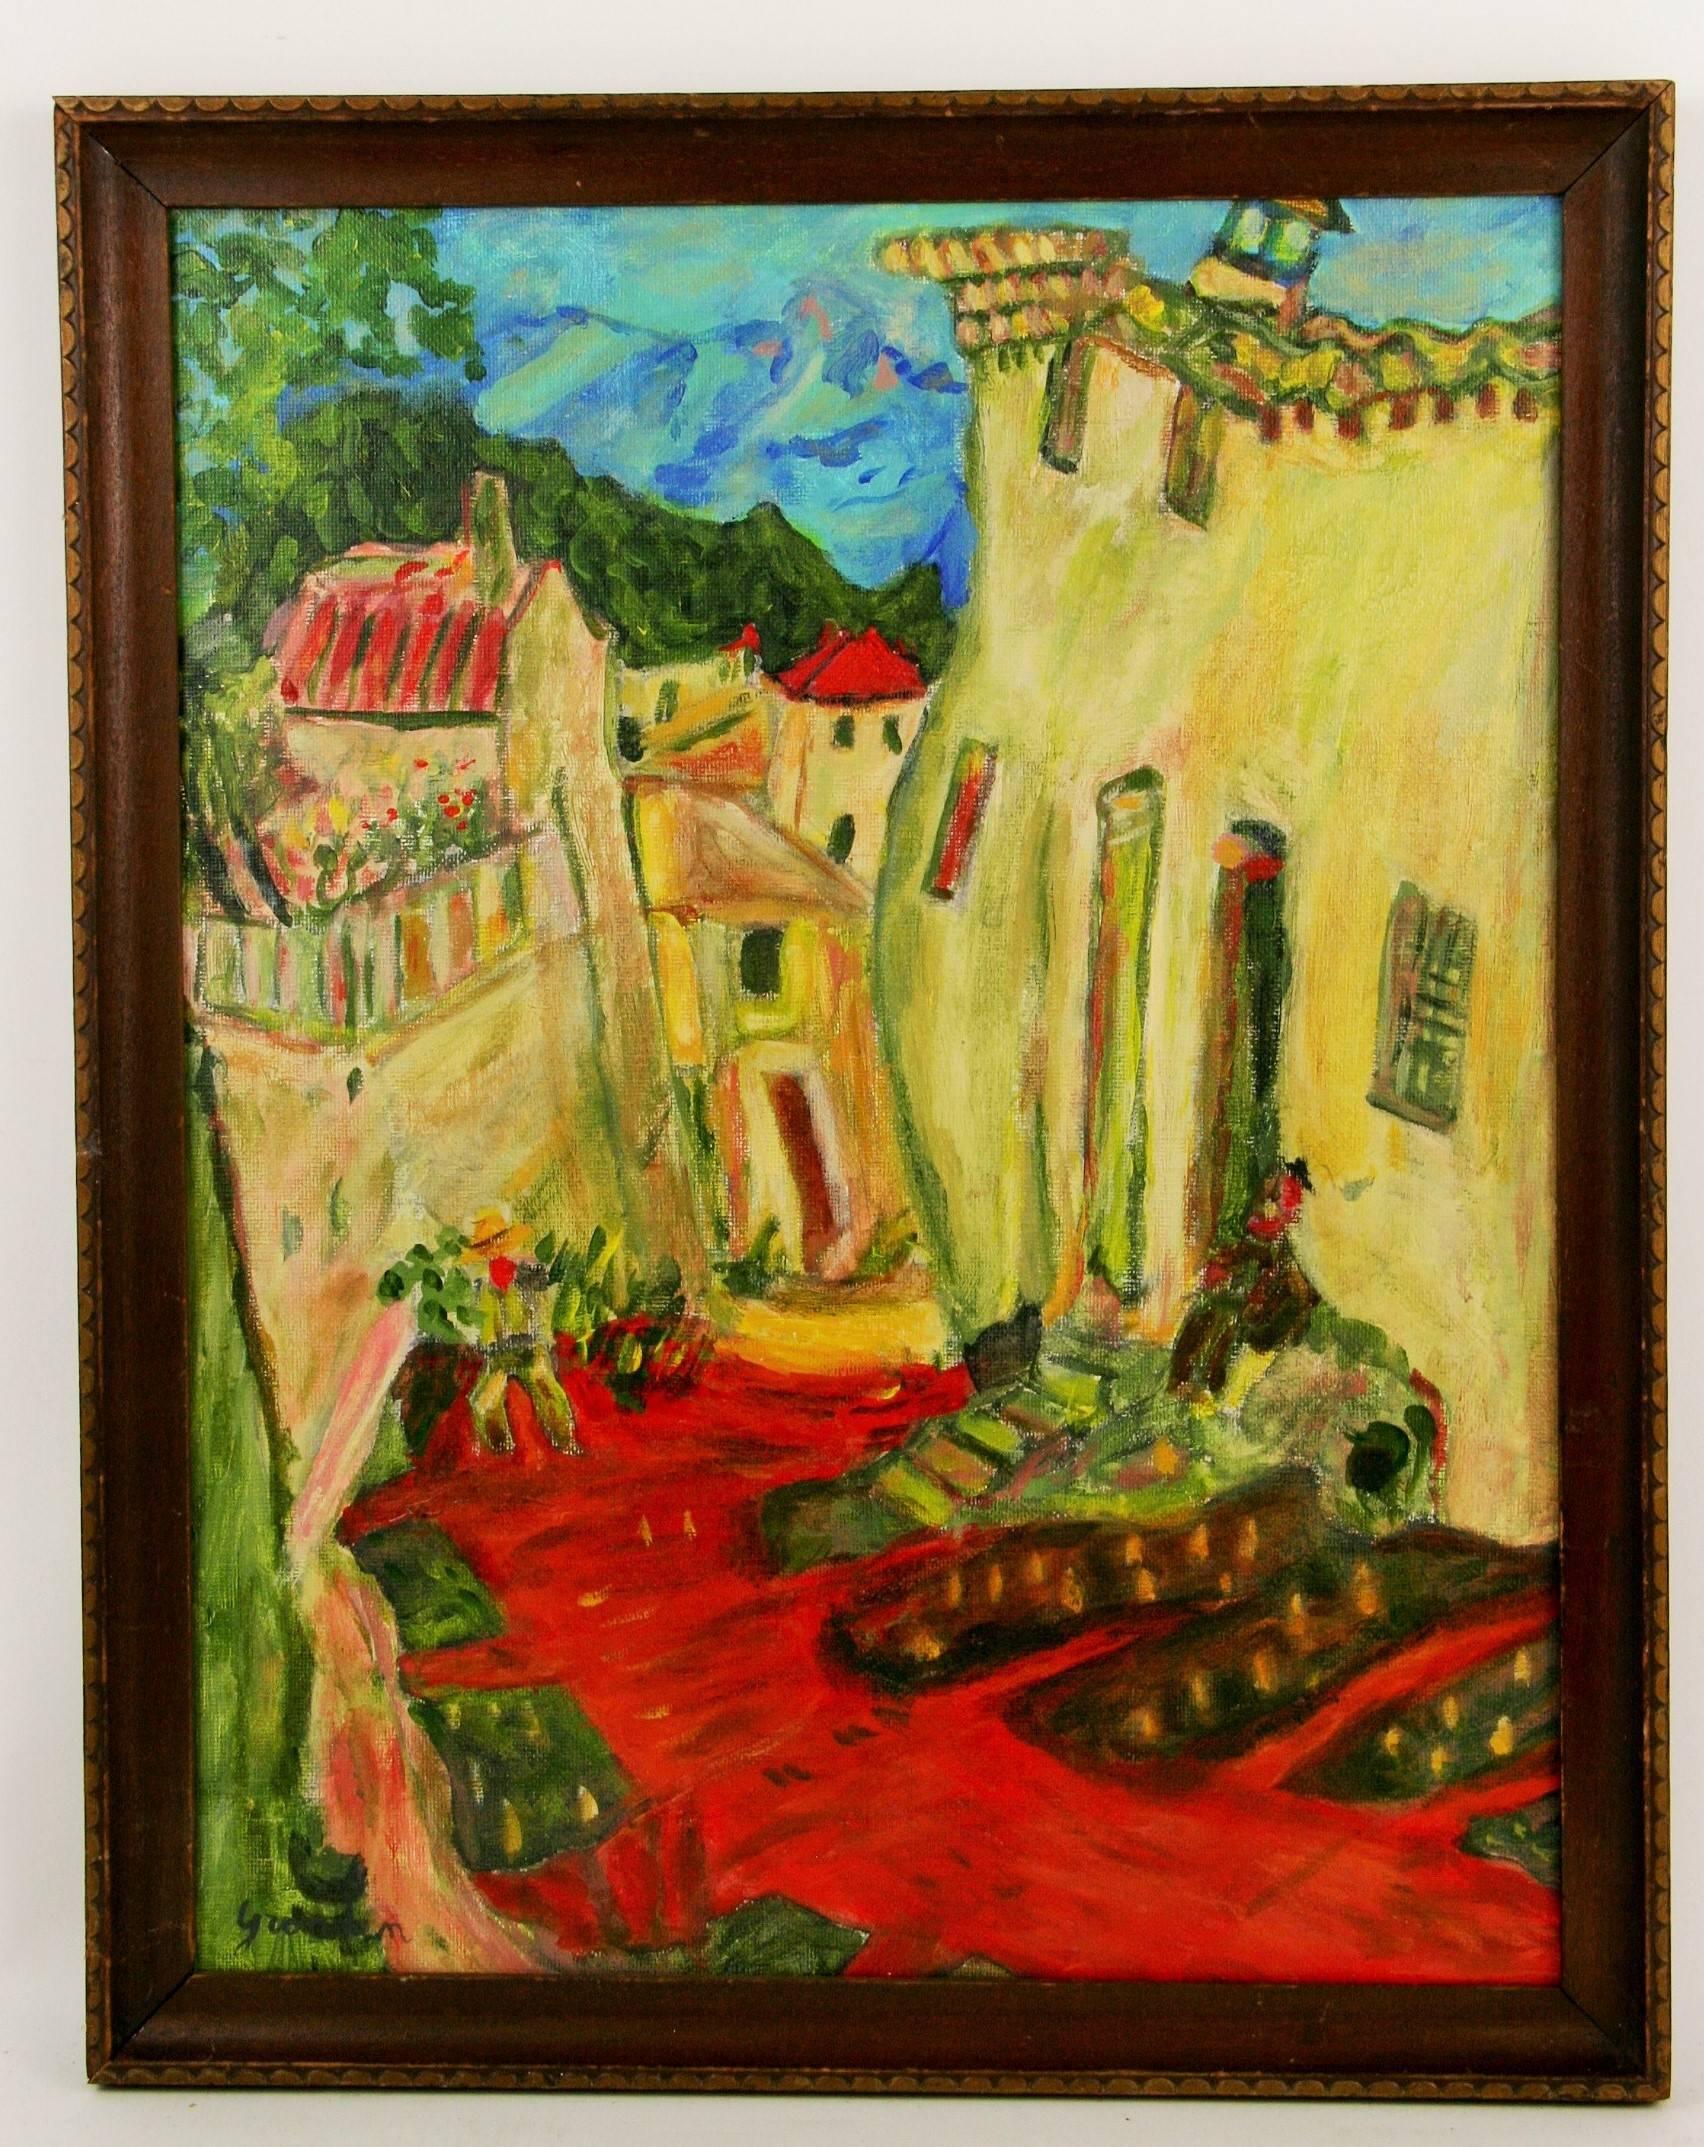 Groendain Abstract Painting -  Vintage Surreal   French Village Landscape  Painting